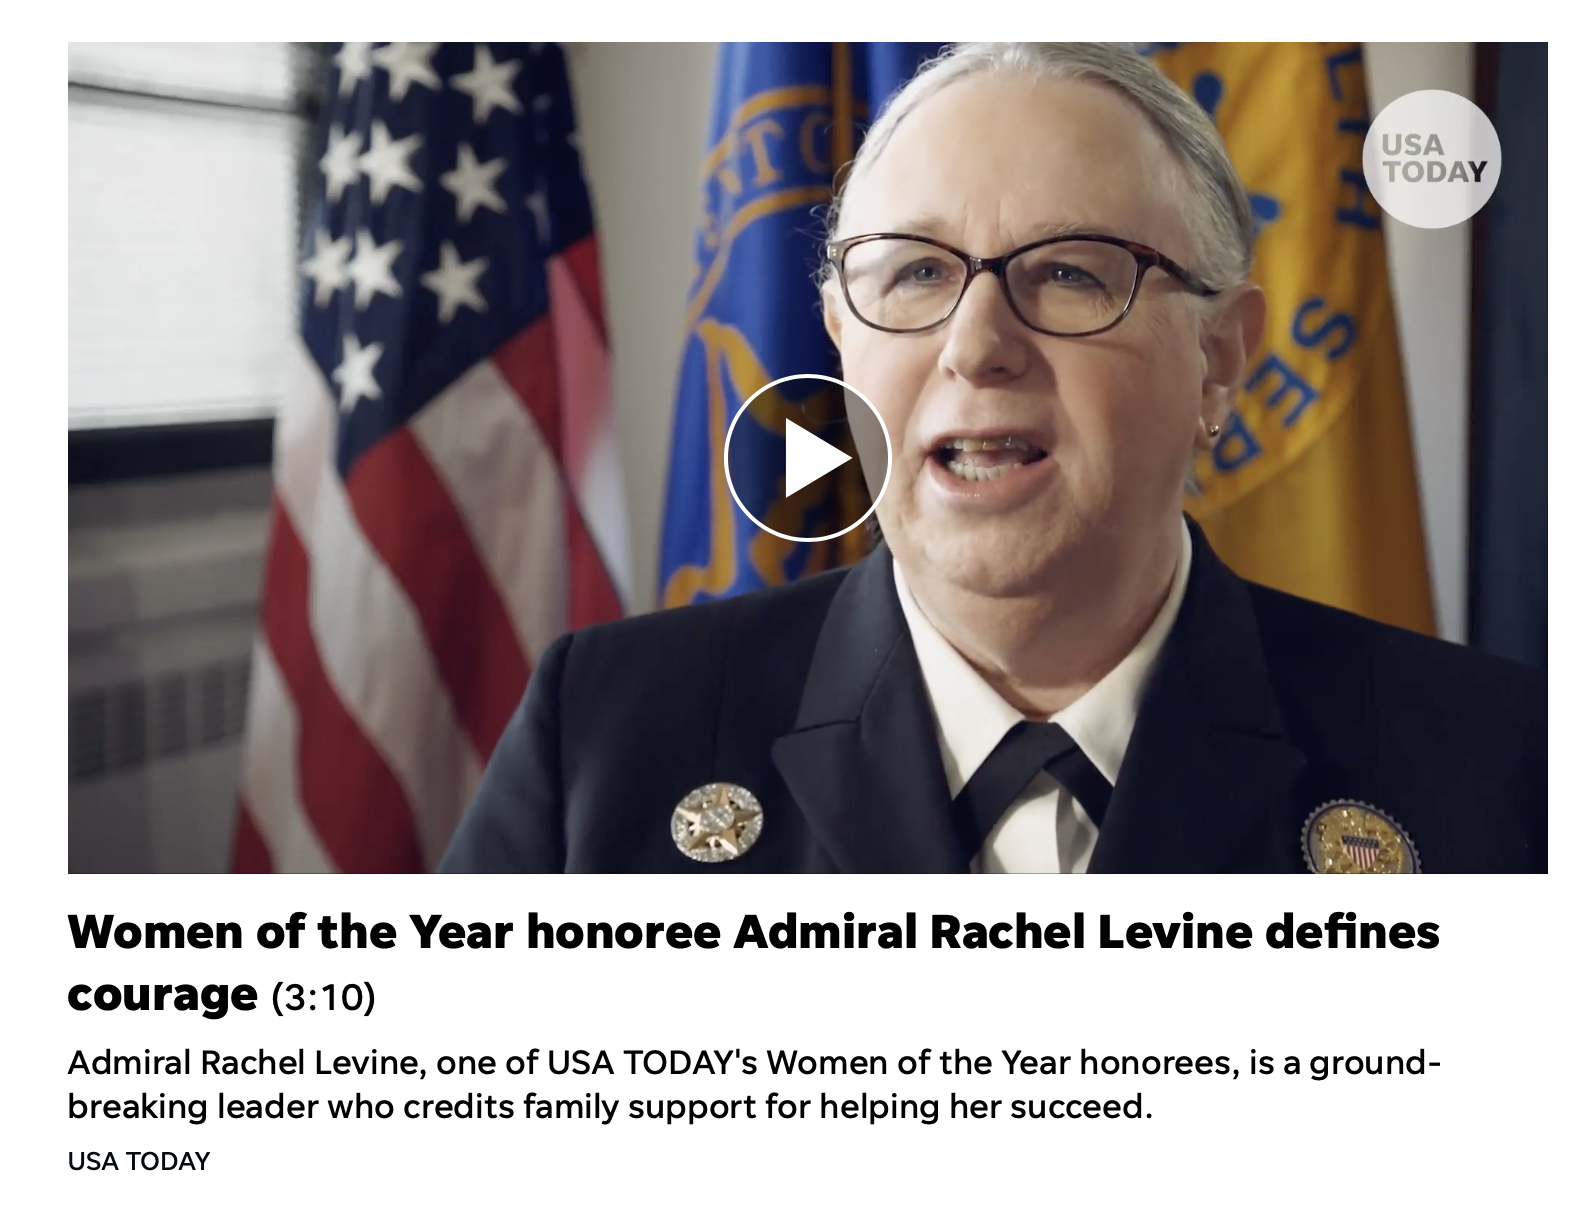 Richard "Rachel" Levine named as a nominee for "Woman of the Year" by USA Today.